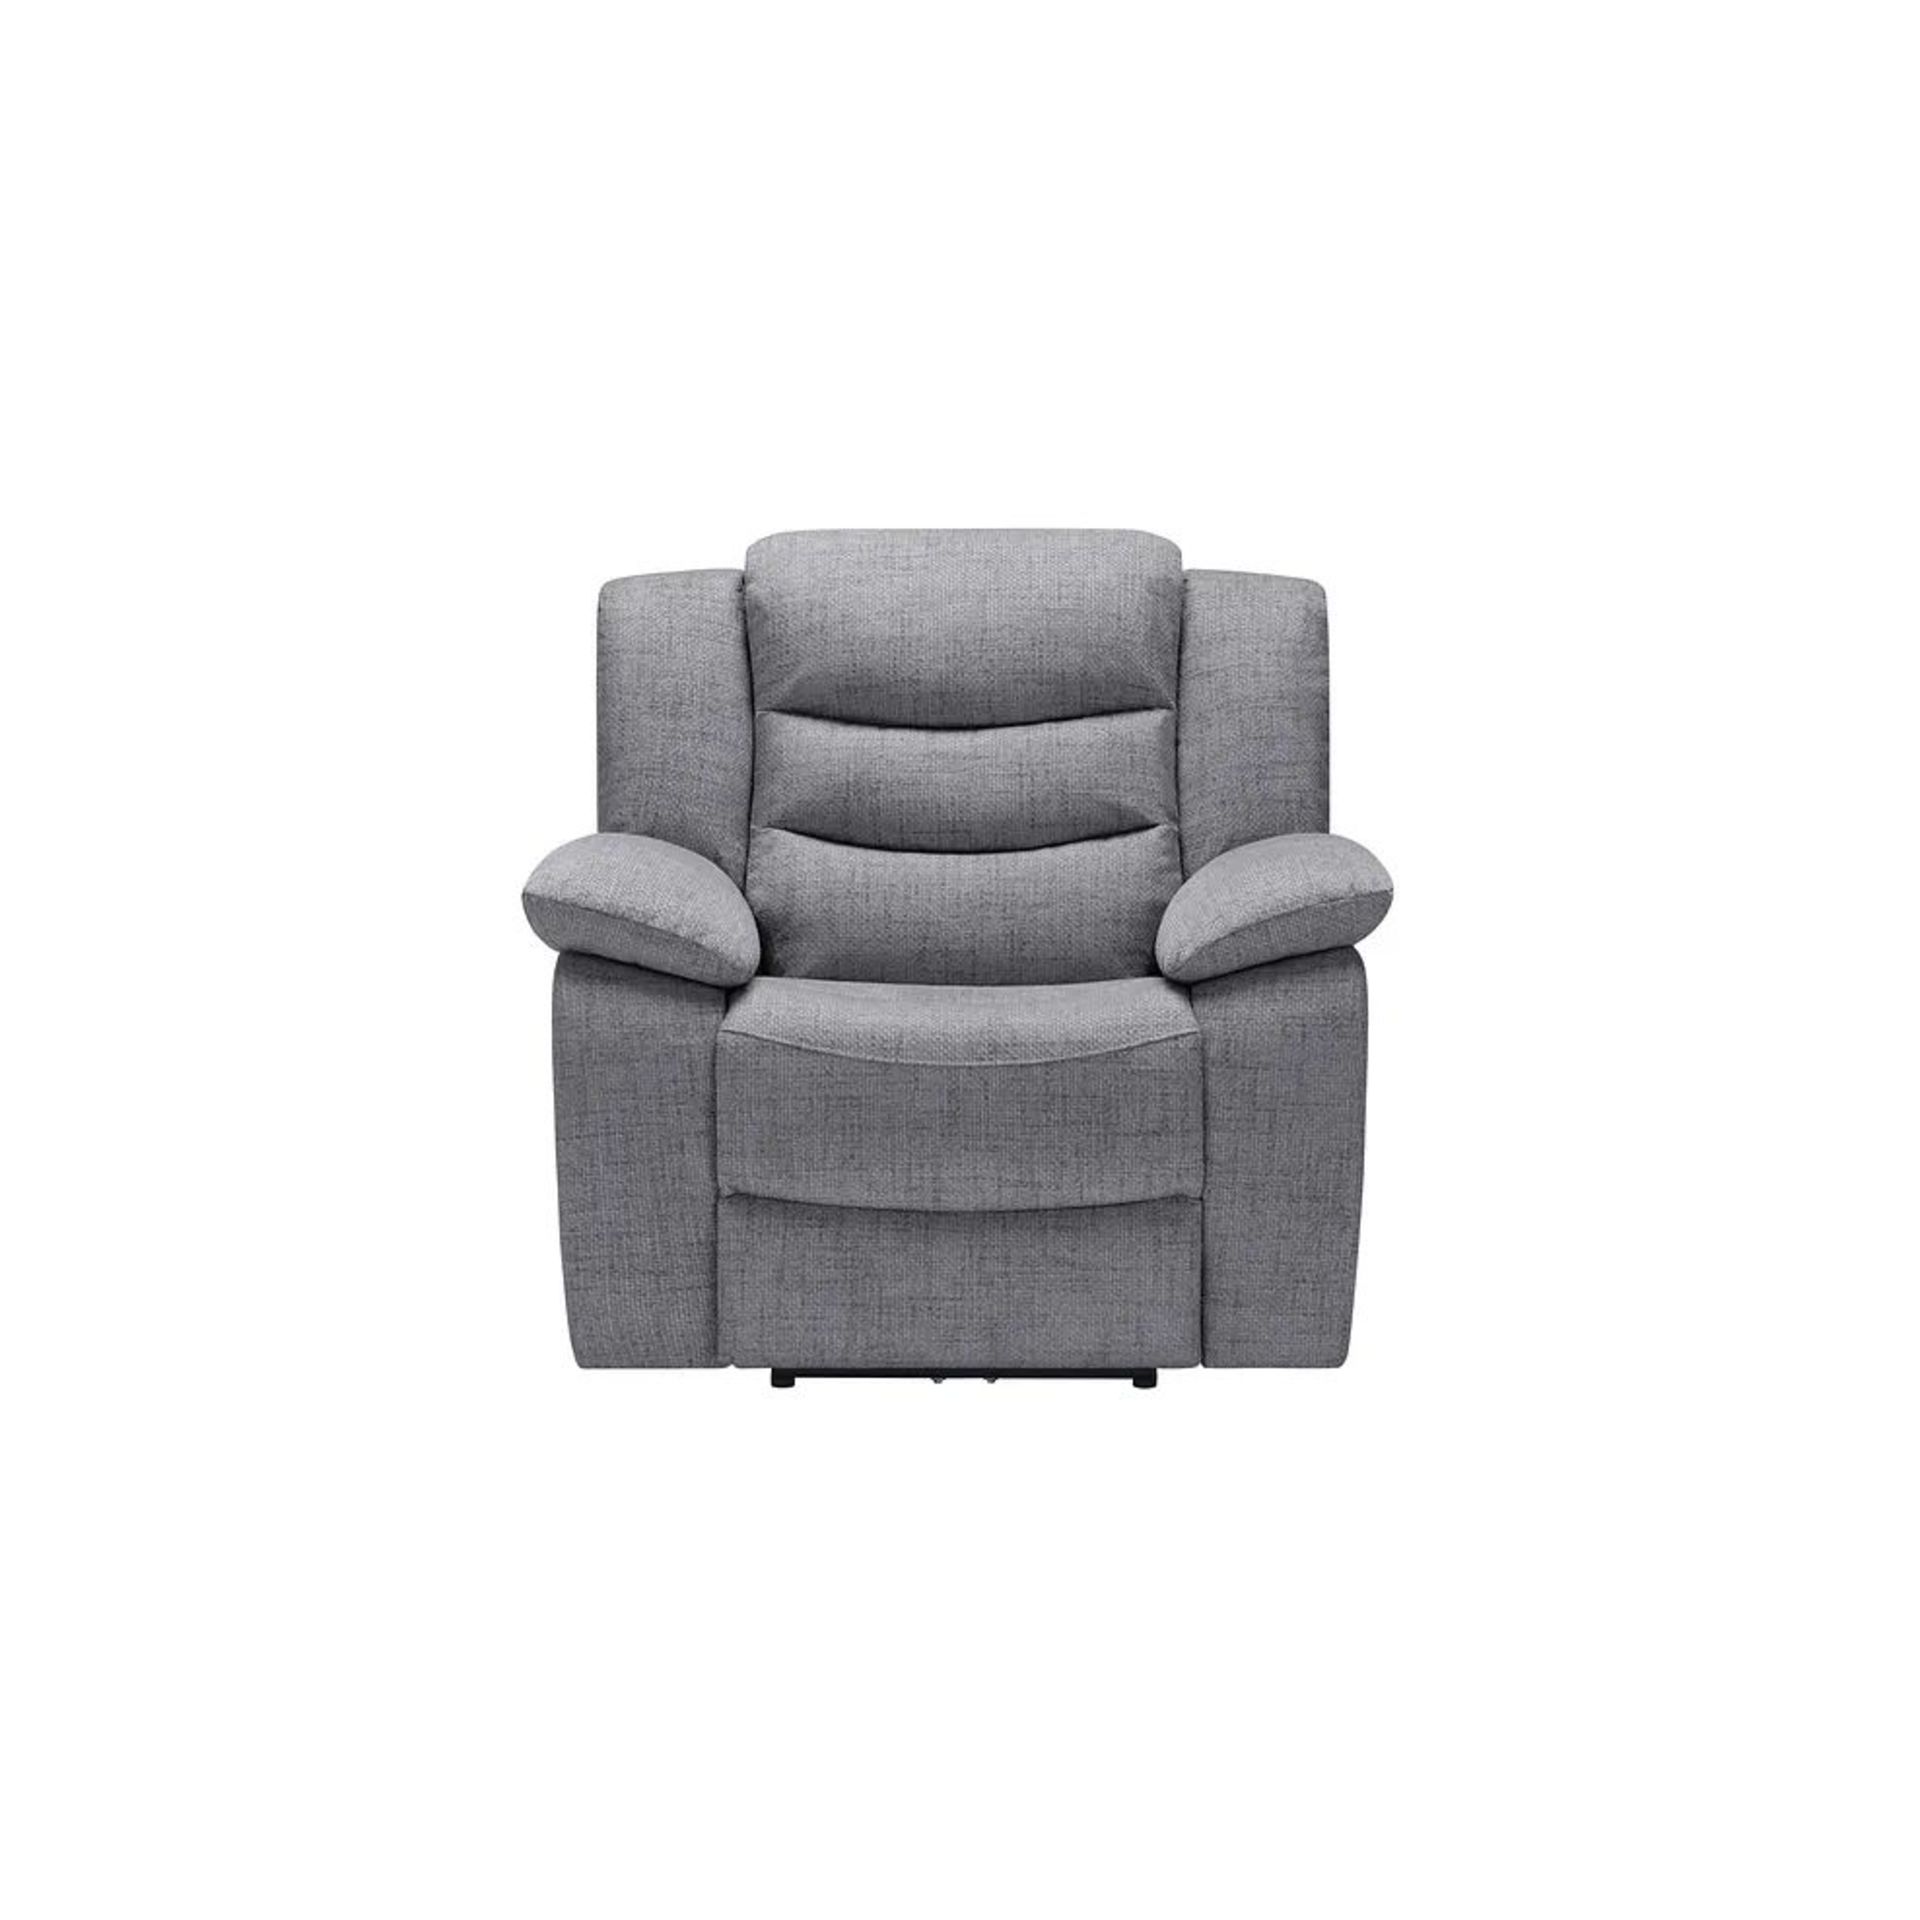 BRAND NEW MARLOW Armchair - SANTOS STEEL FABRIC. RRP £579. Designed to suit any home, our Marlow - Image 2 of 5